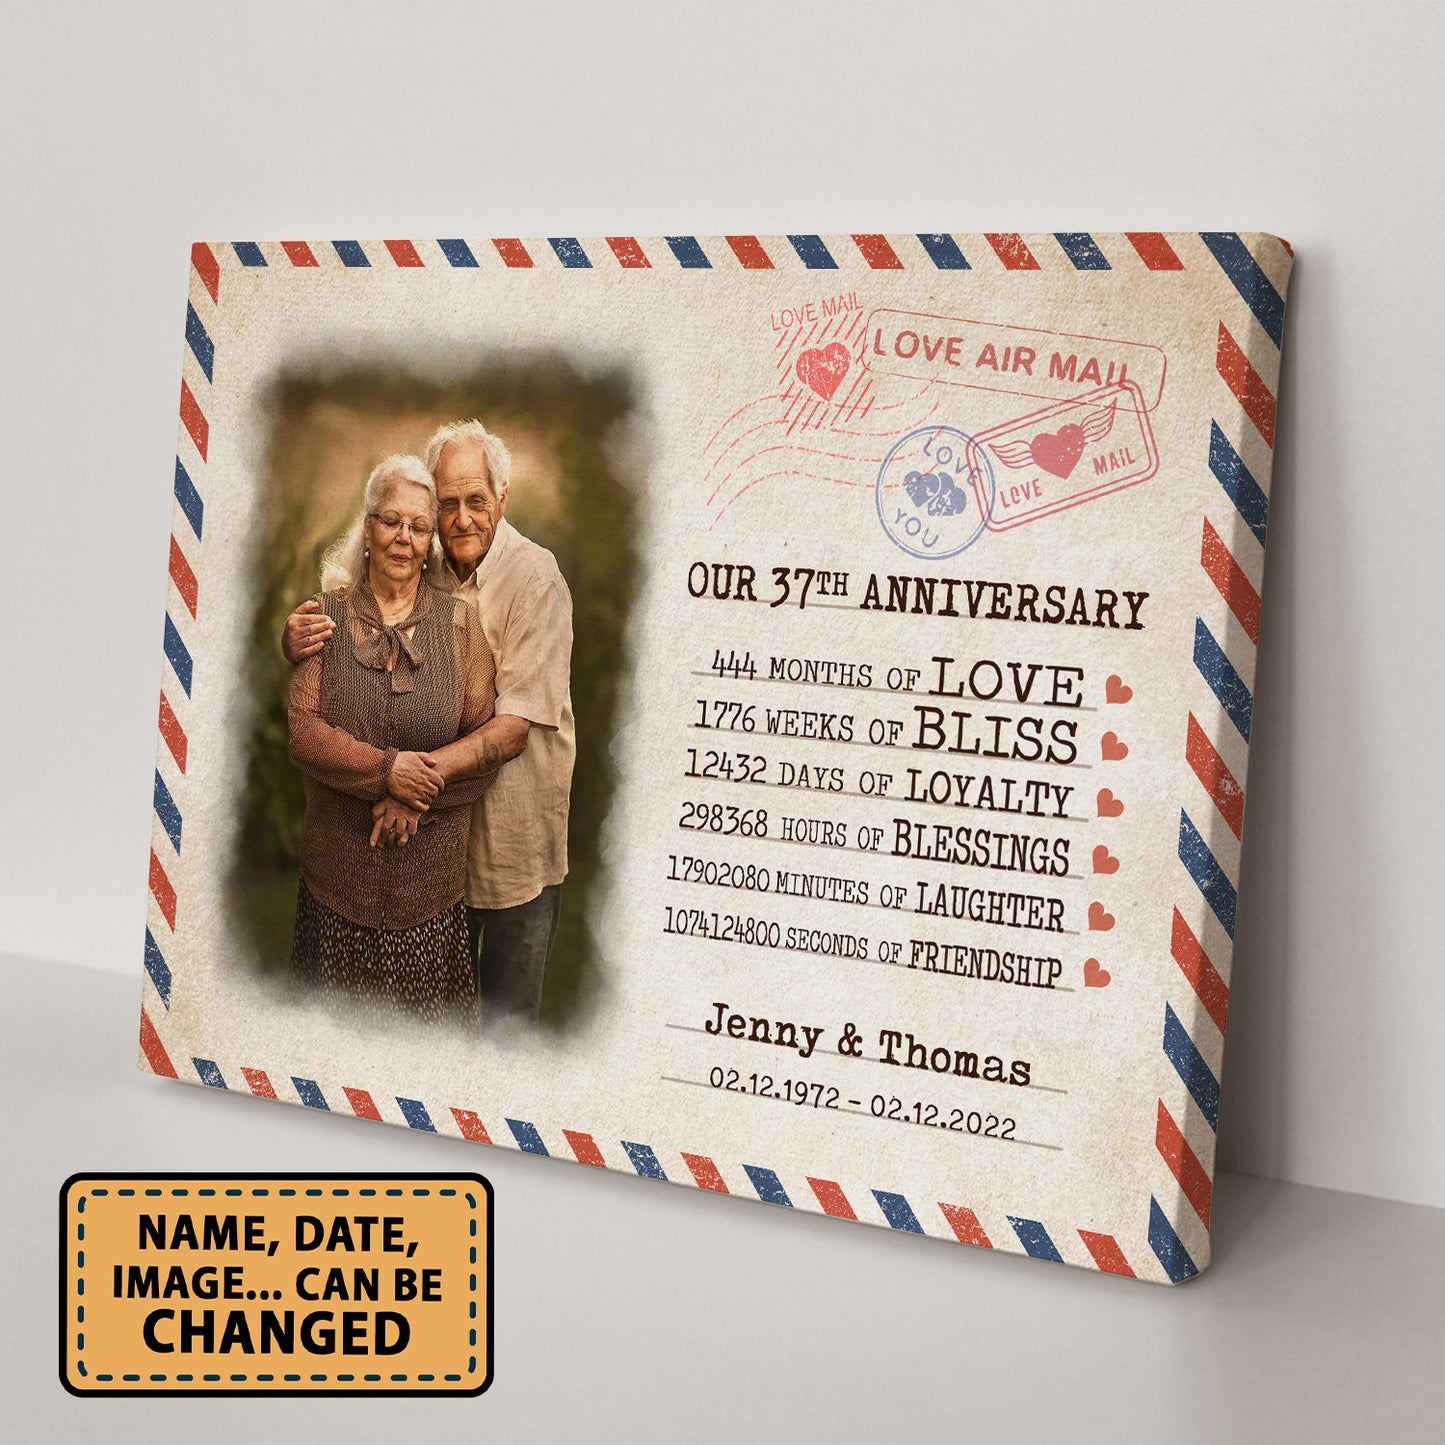 Our 37th Anniversary Letter Valentine Gift Personalized Canvas